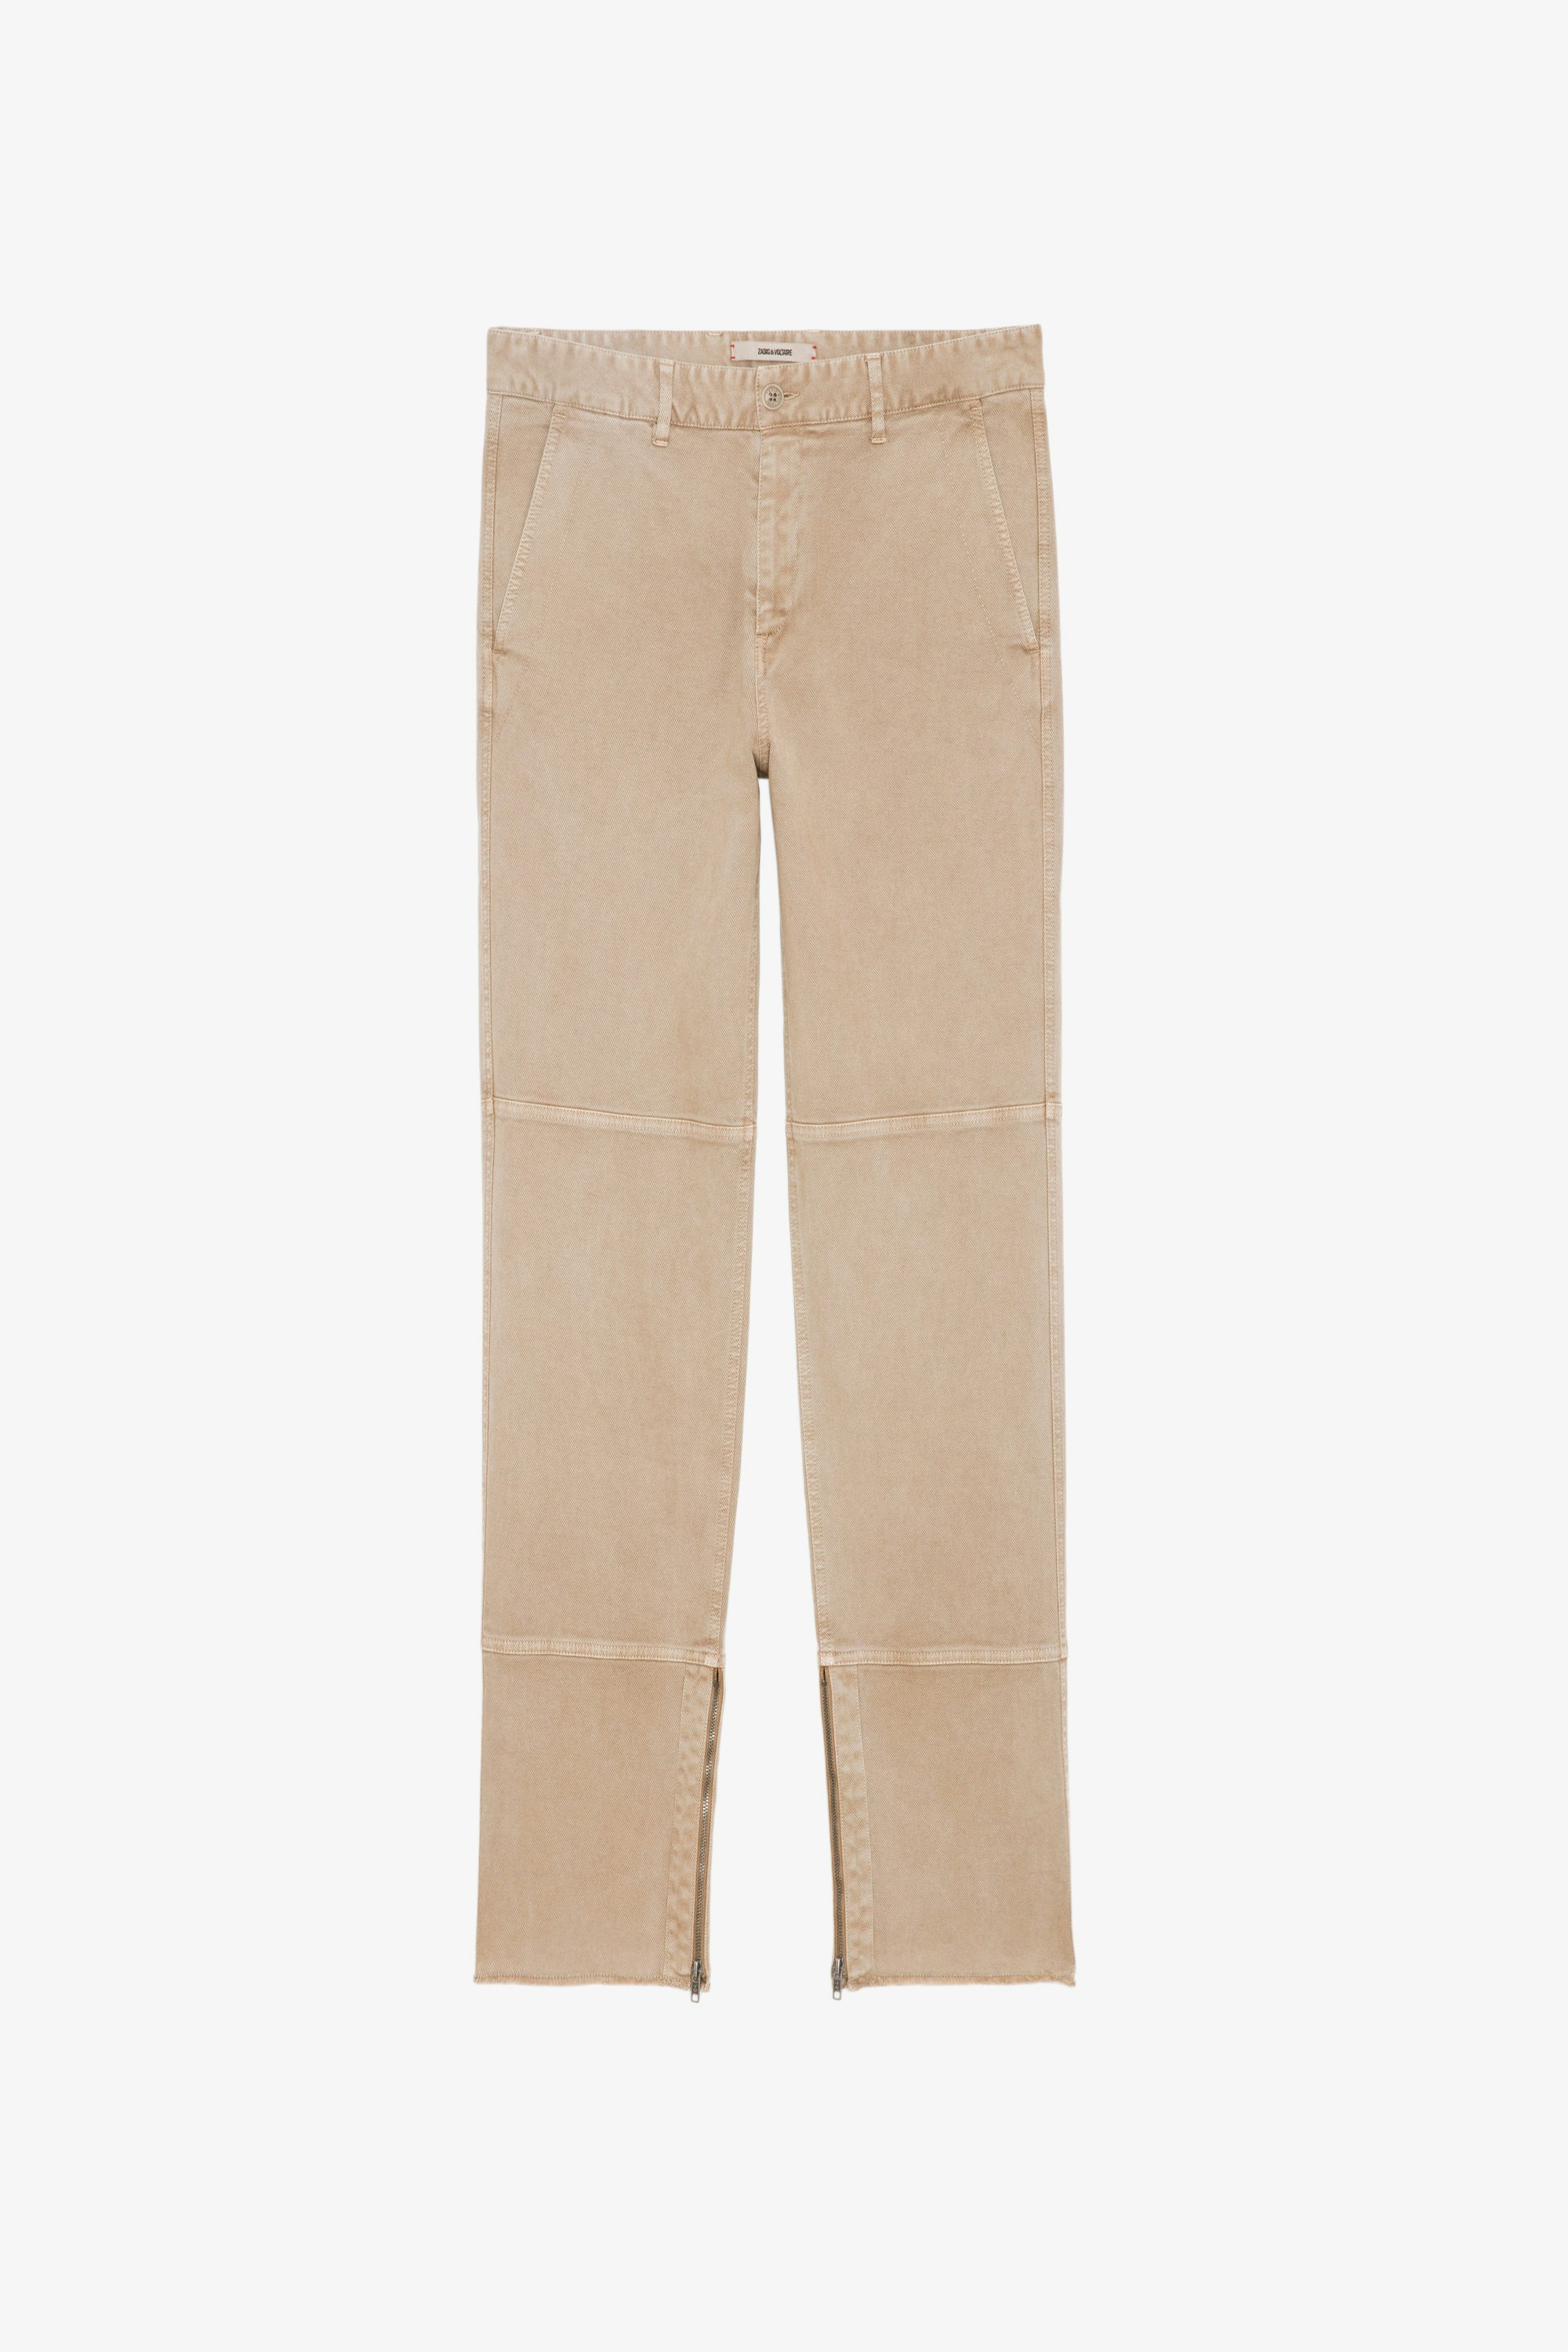 Pocky Trousers - Light beige cotton trousers with zip fly and raw edges.